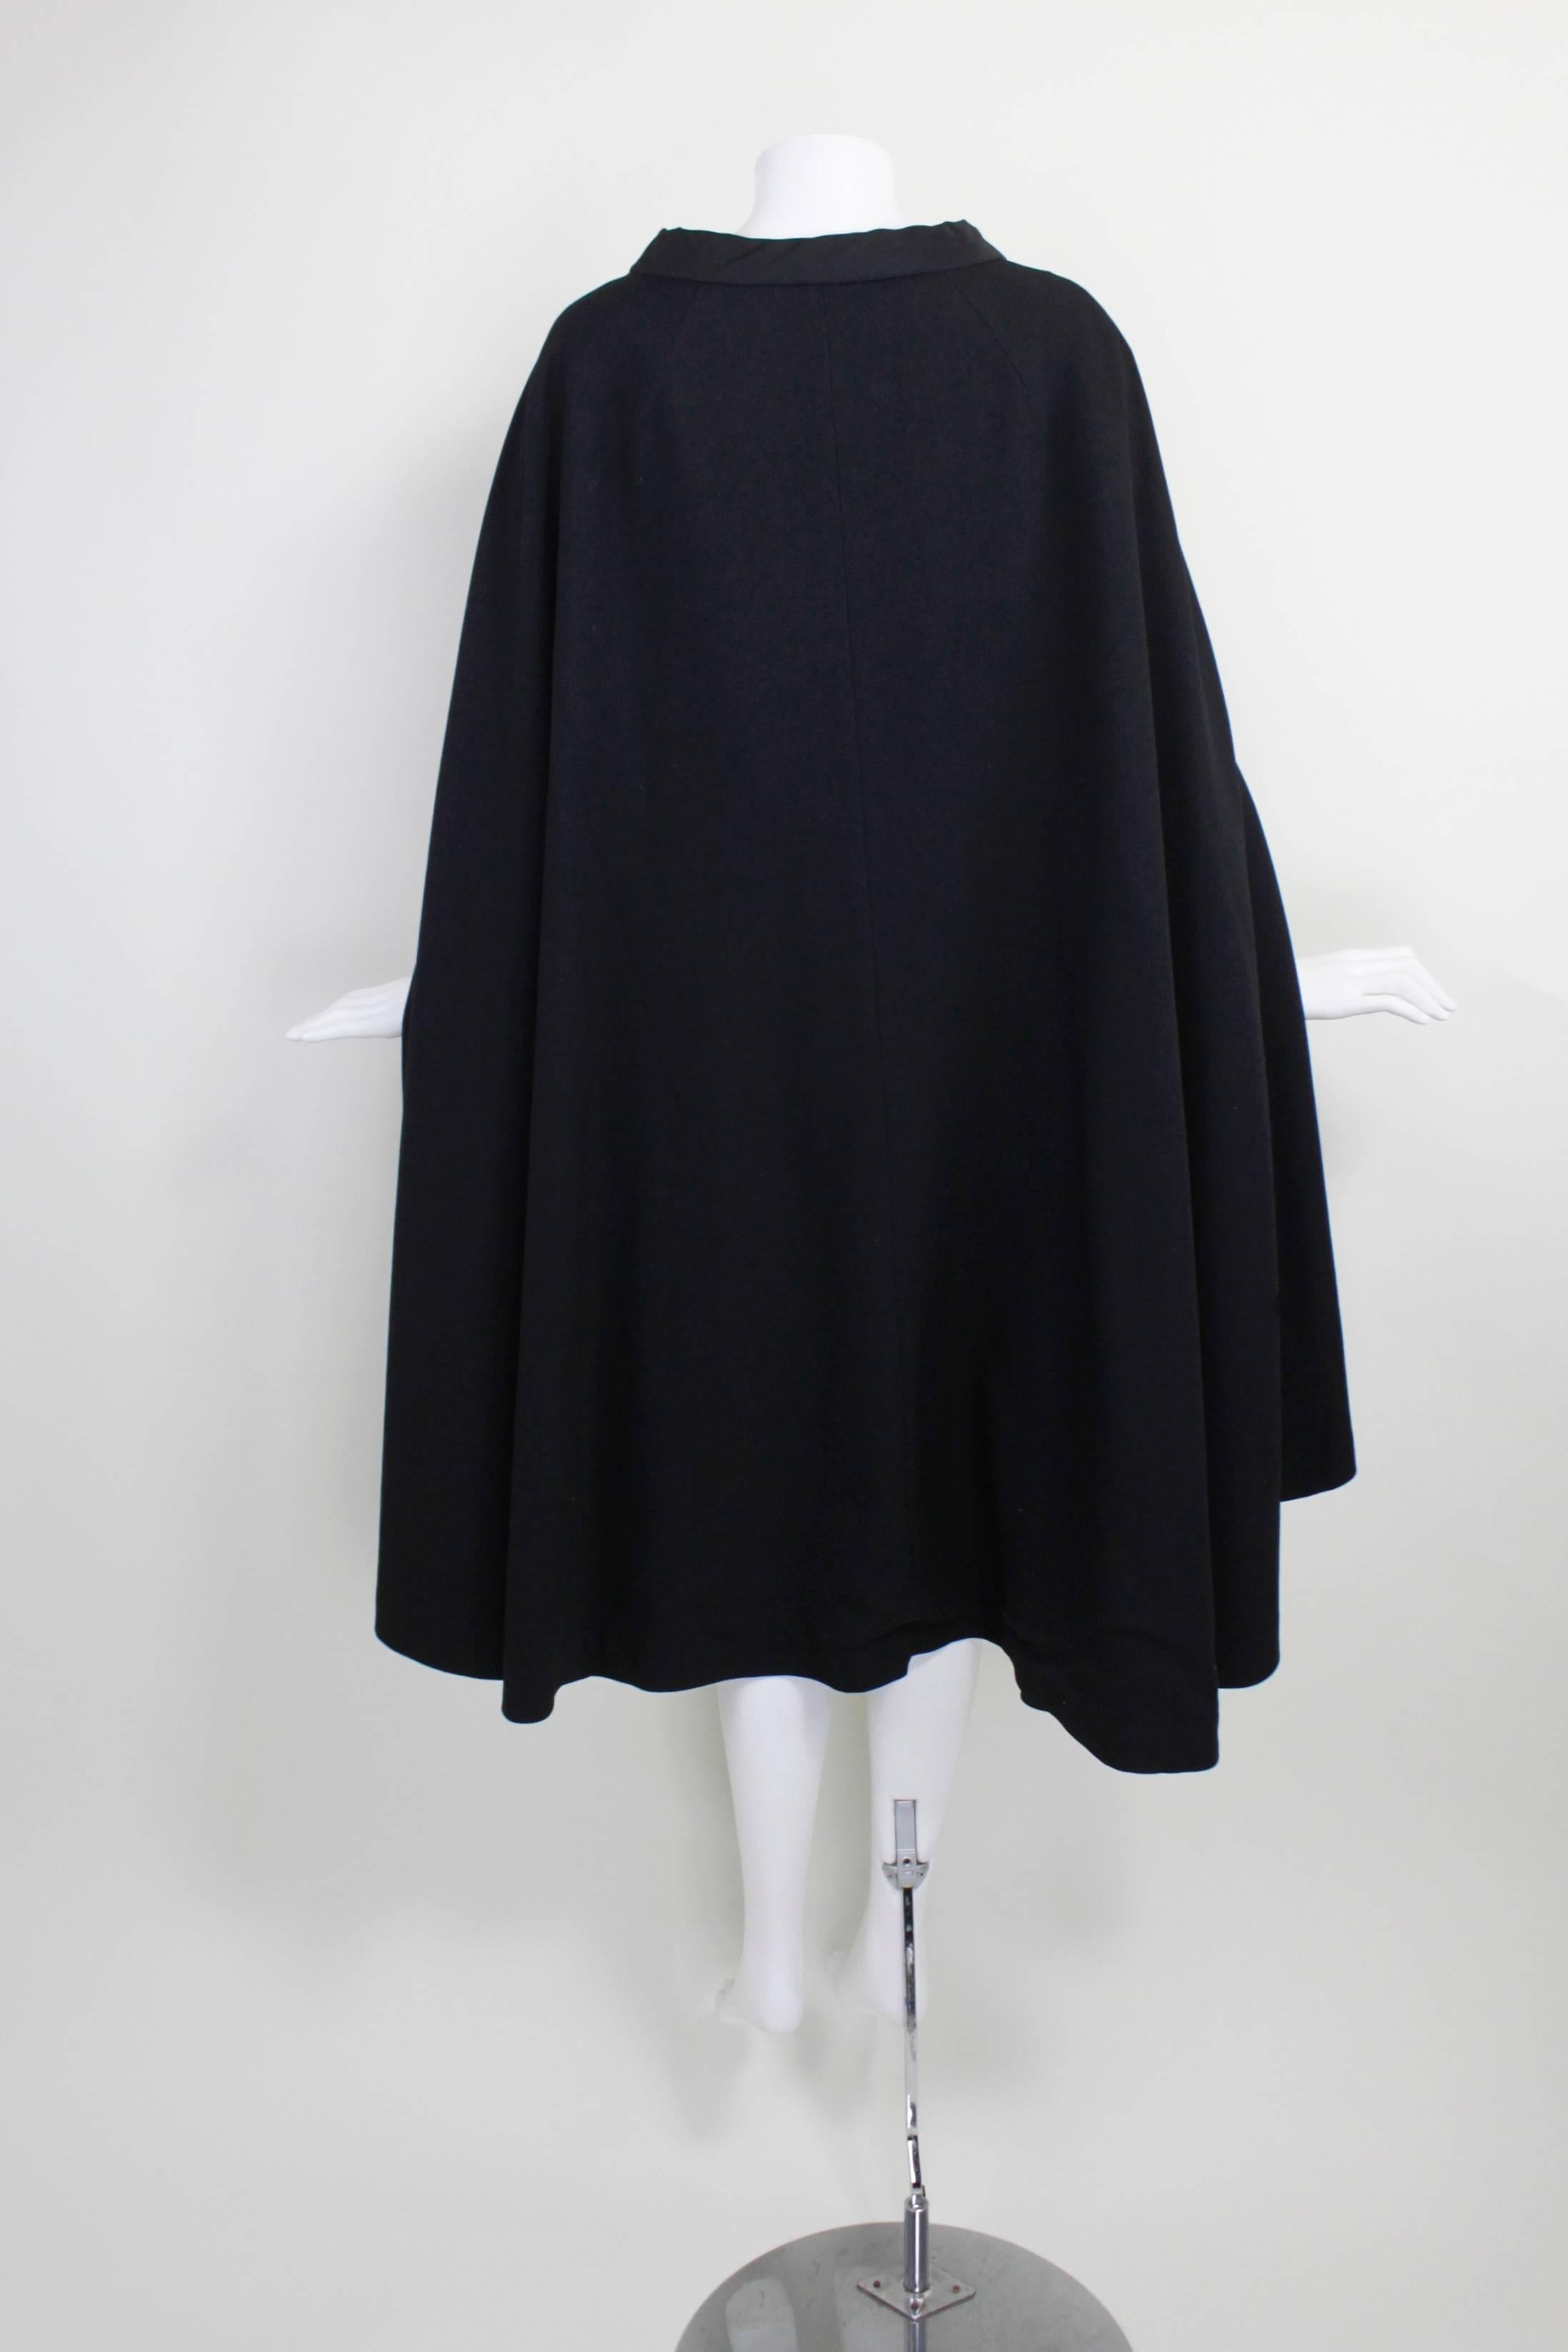 1960s Pierre Cardin Iconic Black Wool Cape with Silk Lining

Measurements--
Lenght, Center Back to Hem: 44 inches